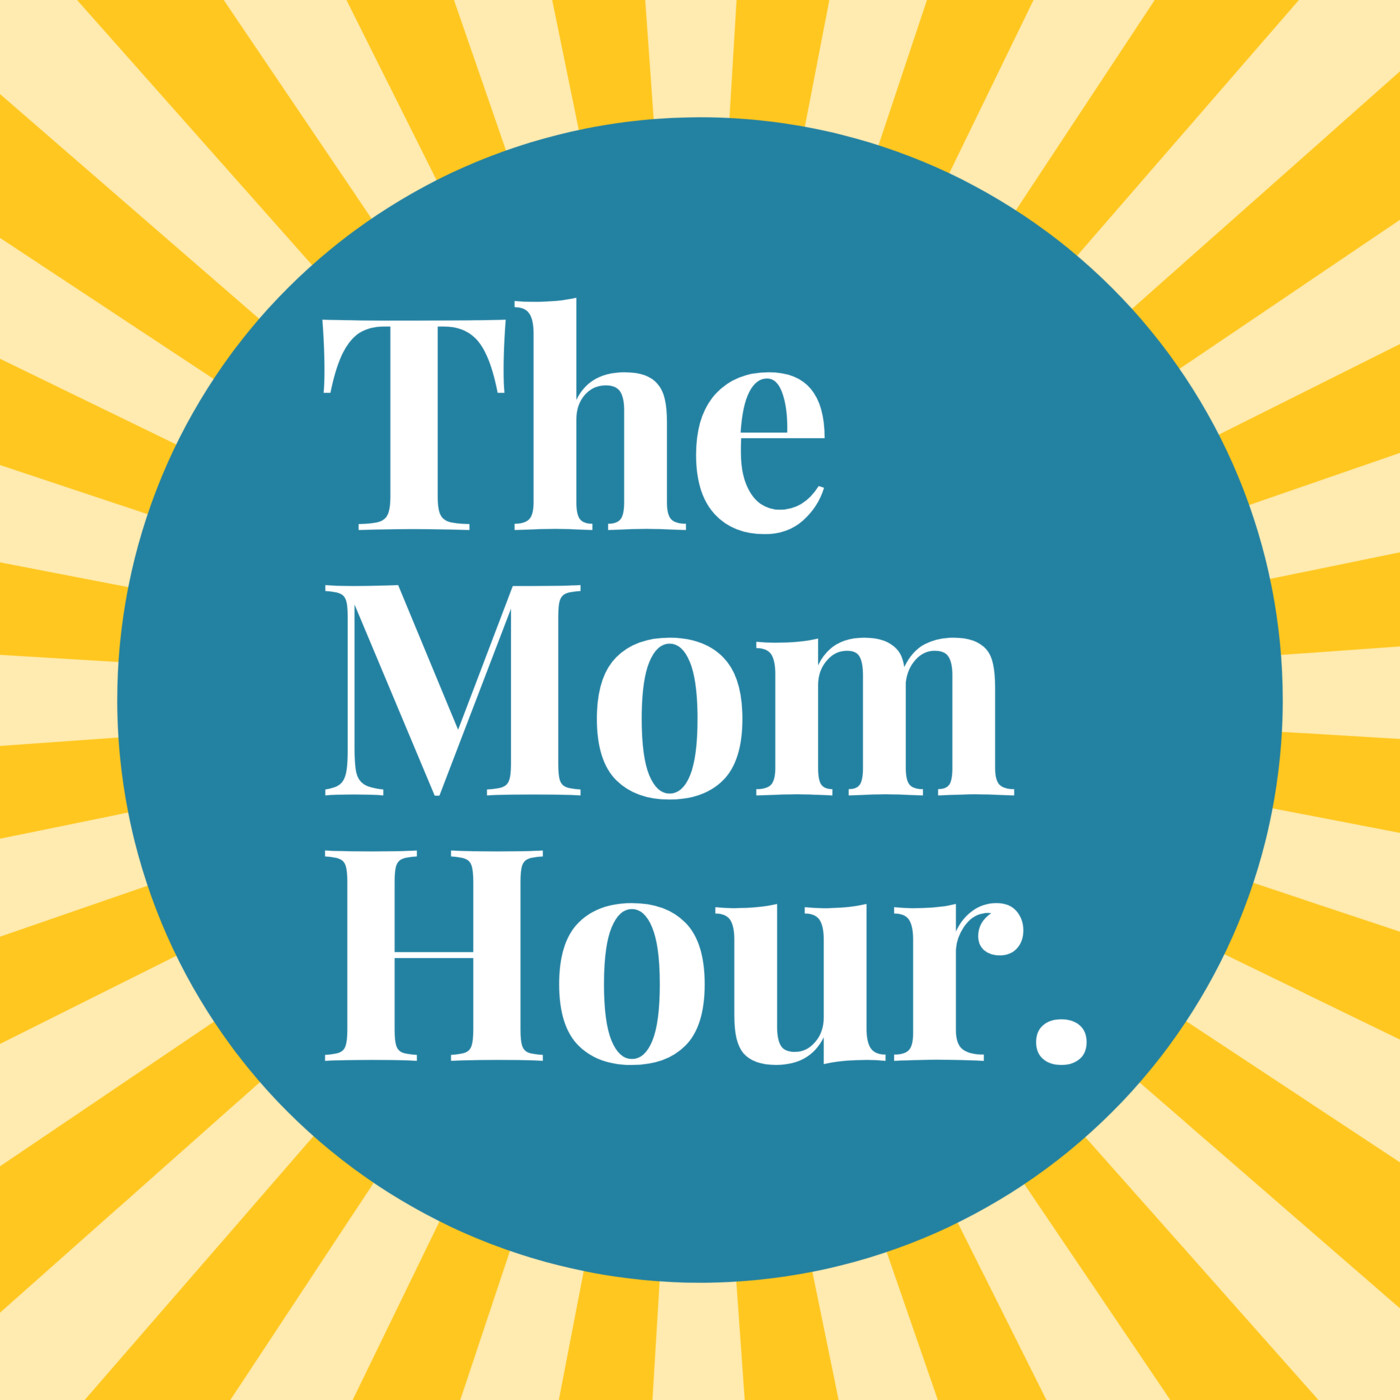 More Than Mom: Podcast Listening & Book Reading Habits (Plus A Few We’re Loving Lately)